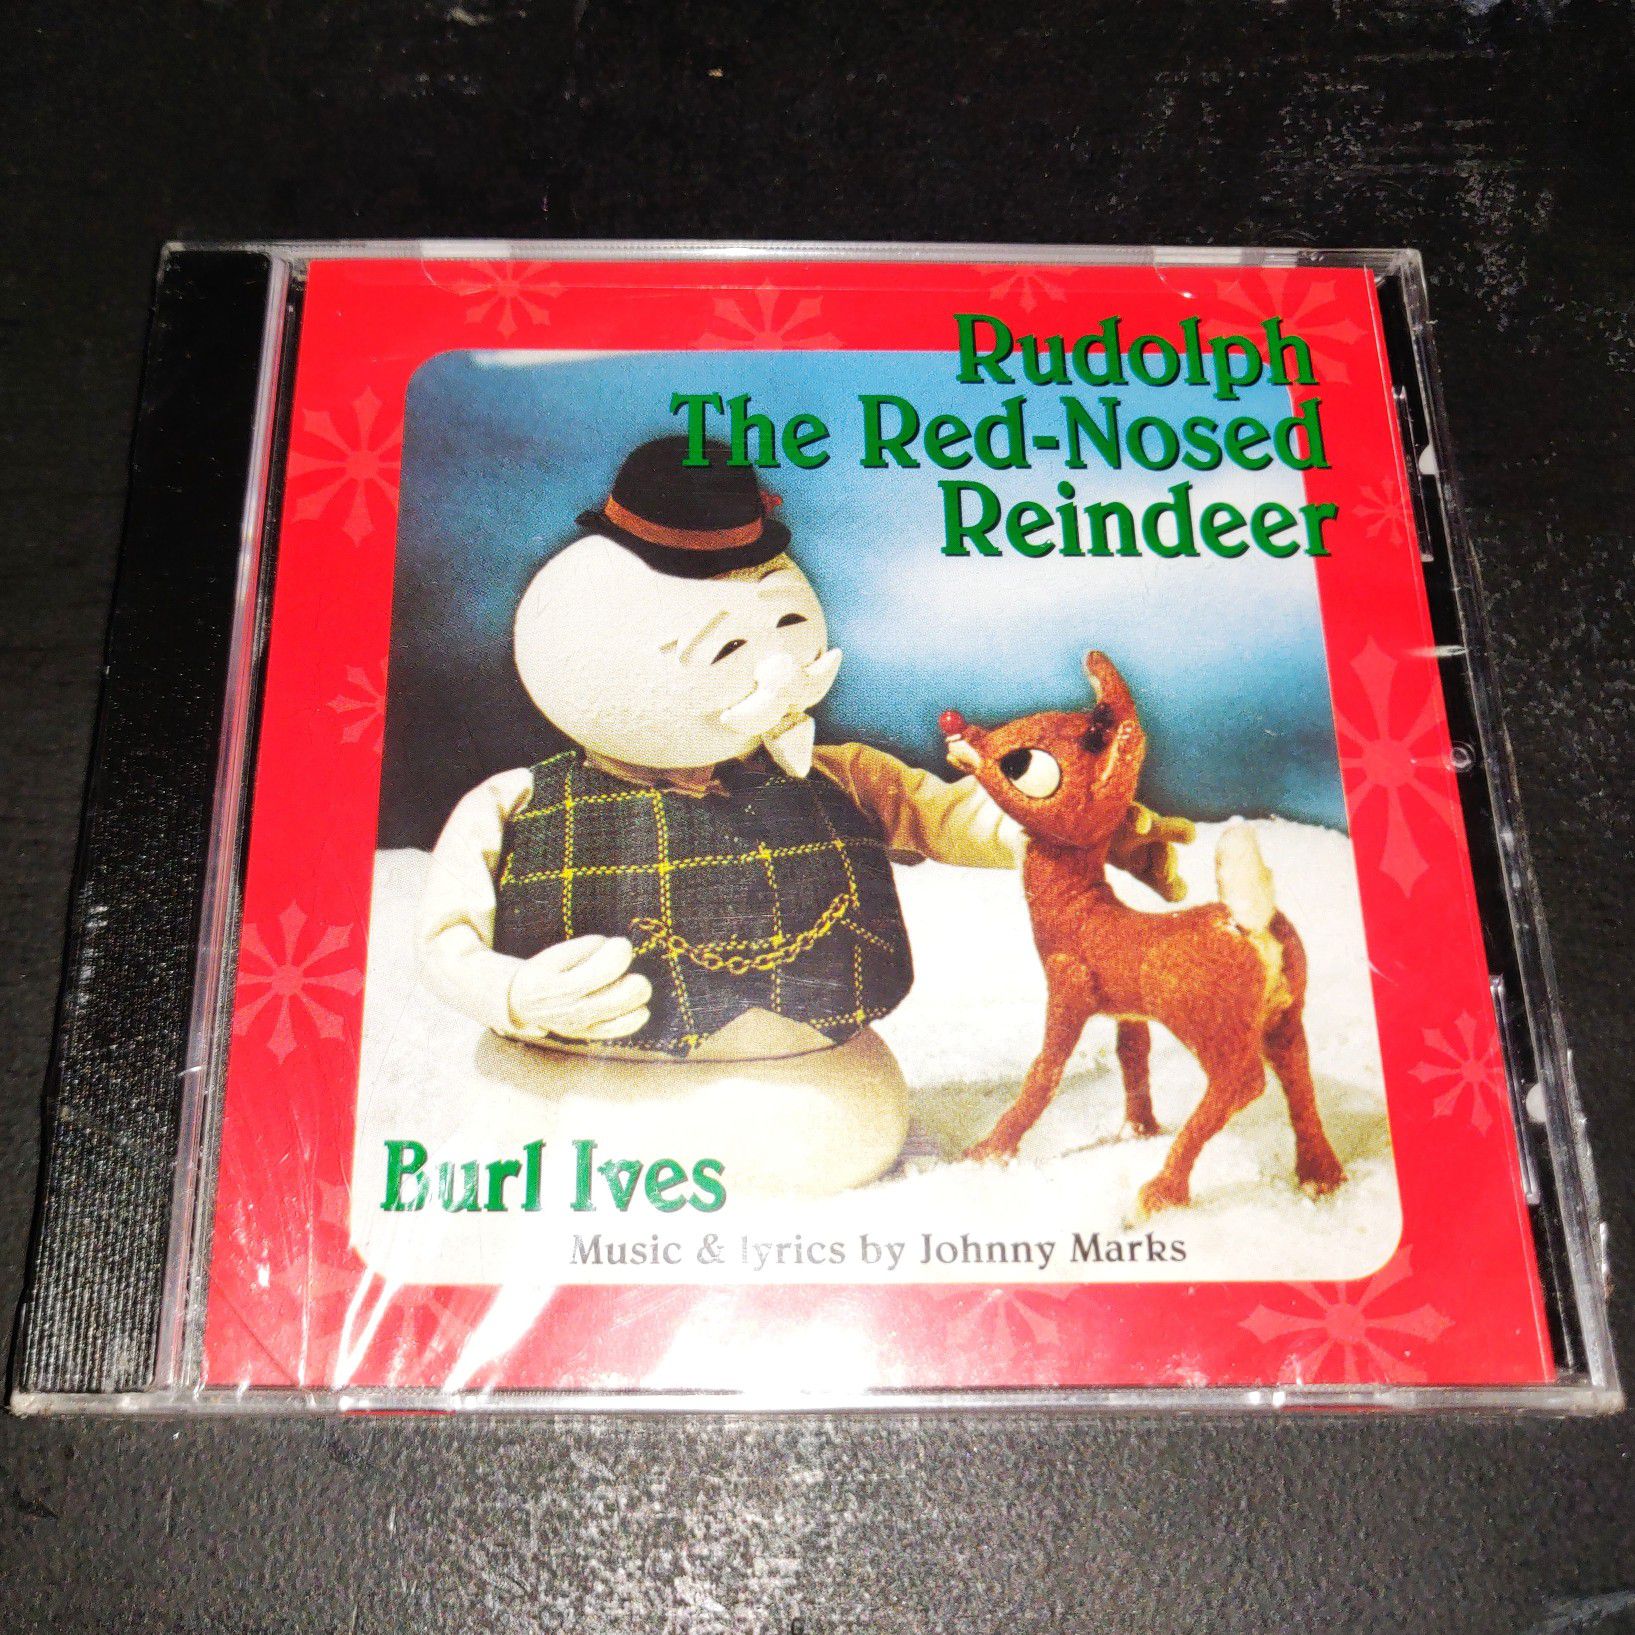 Rudolph The Red-Nosed Reindeer Burl Ives CD, Christmas music classic holiday songs animated film soundtrack